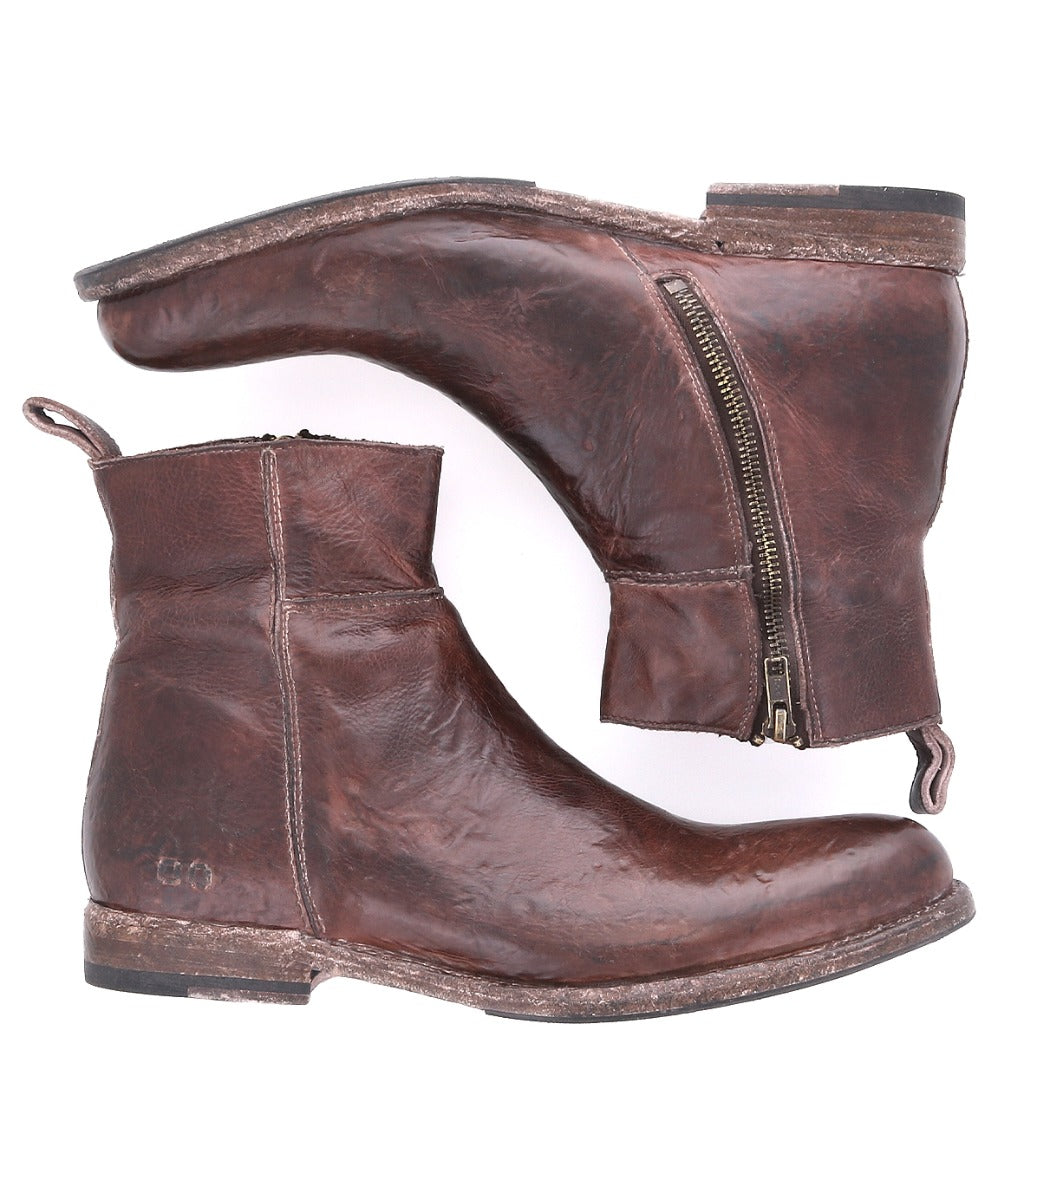 A pair of worn Bed Stu Kaldi brown leather ankle boots with side zippers, designed for comfort, displayed against a white background.